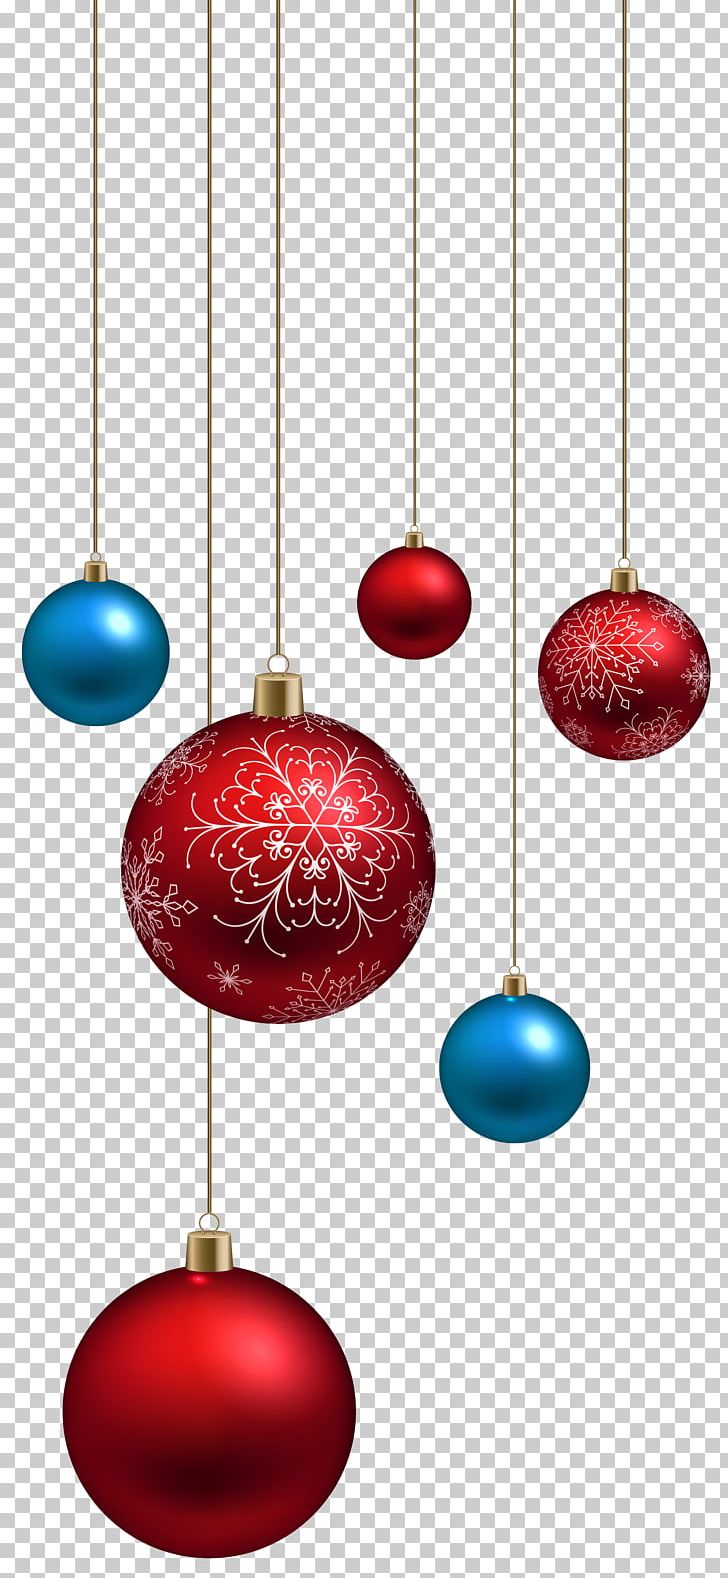 Santa Claus Christmas Ornament PNG, Clipart, Balls, Blue Christmas, Christmas, Christmas Balls, Christmas Clipart Free PNG Download